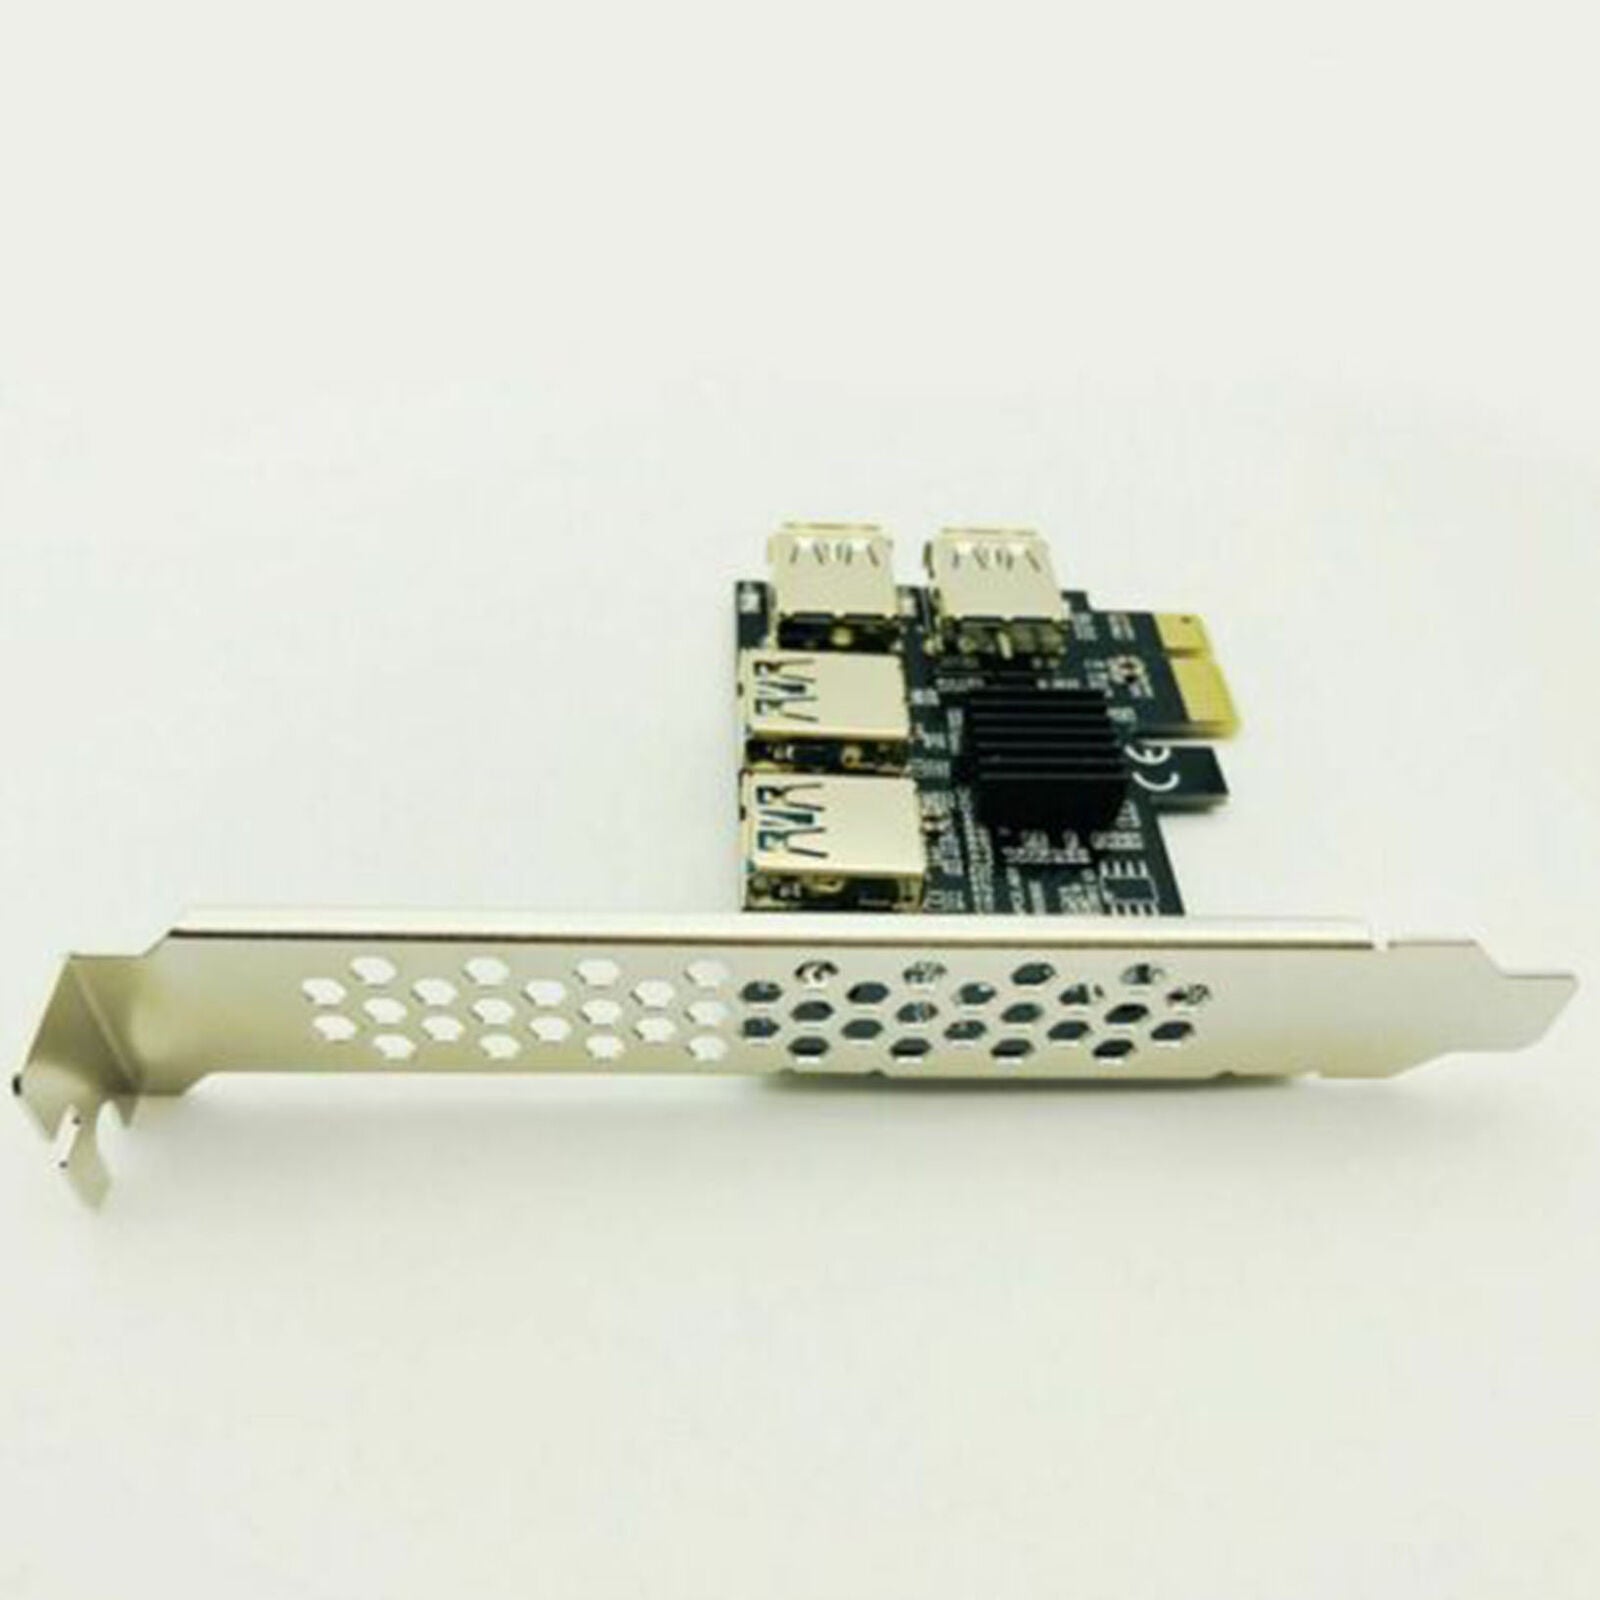 New 4 Slot USB 3.0 PCI-E Express 1x to 16x Riser Card Adapter PCIE Multiplier